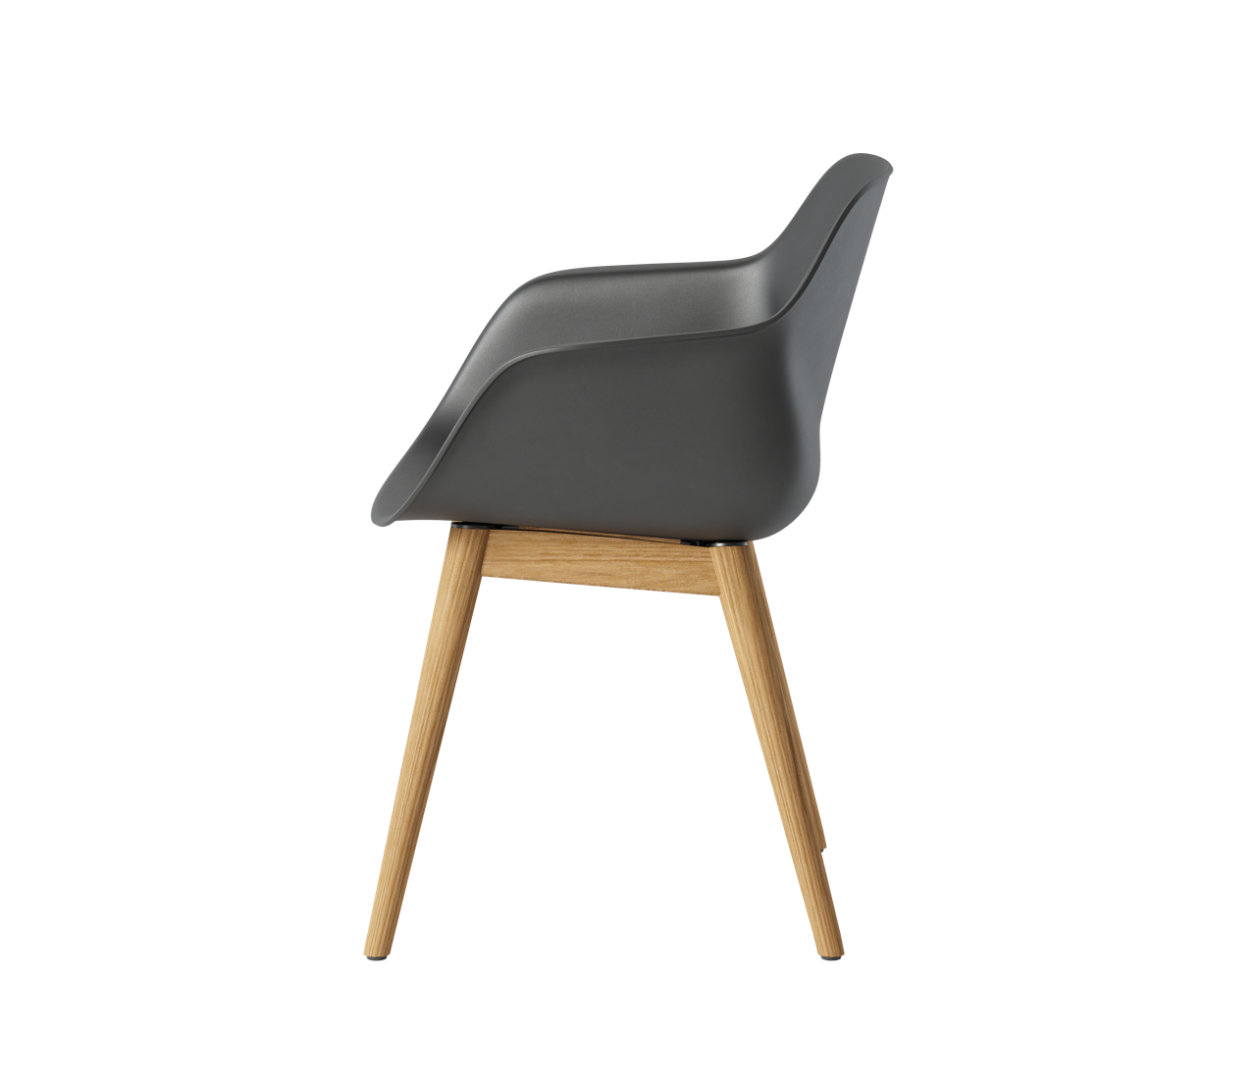 OCEE&FOUR – Chairs – FourMe 44 – Plastic shell - Oak Frame - Packshot Image 1 Large